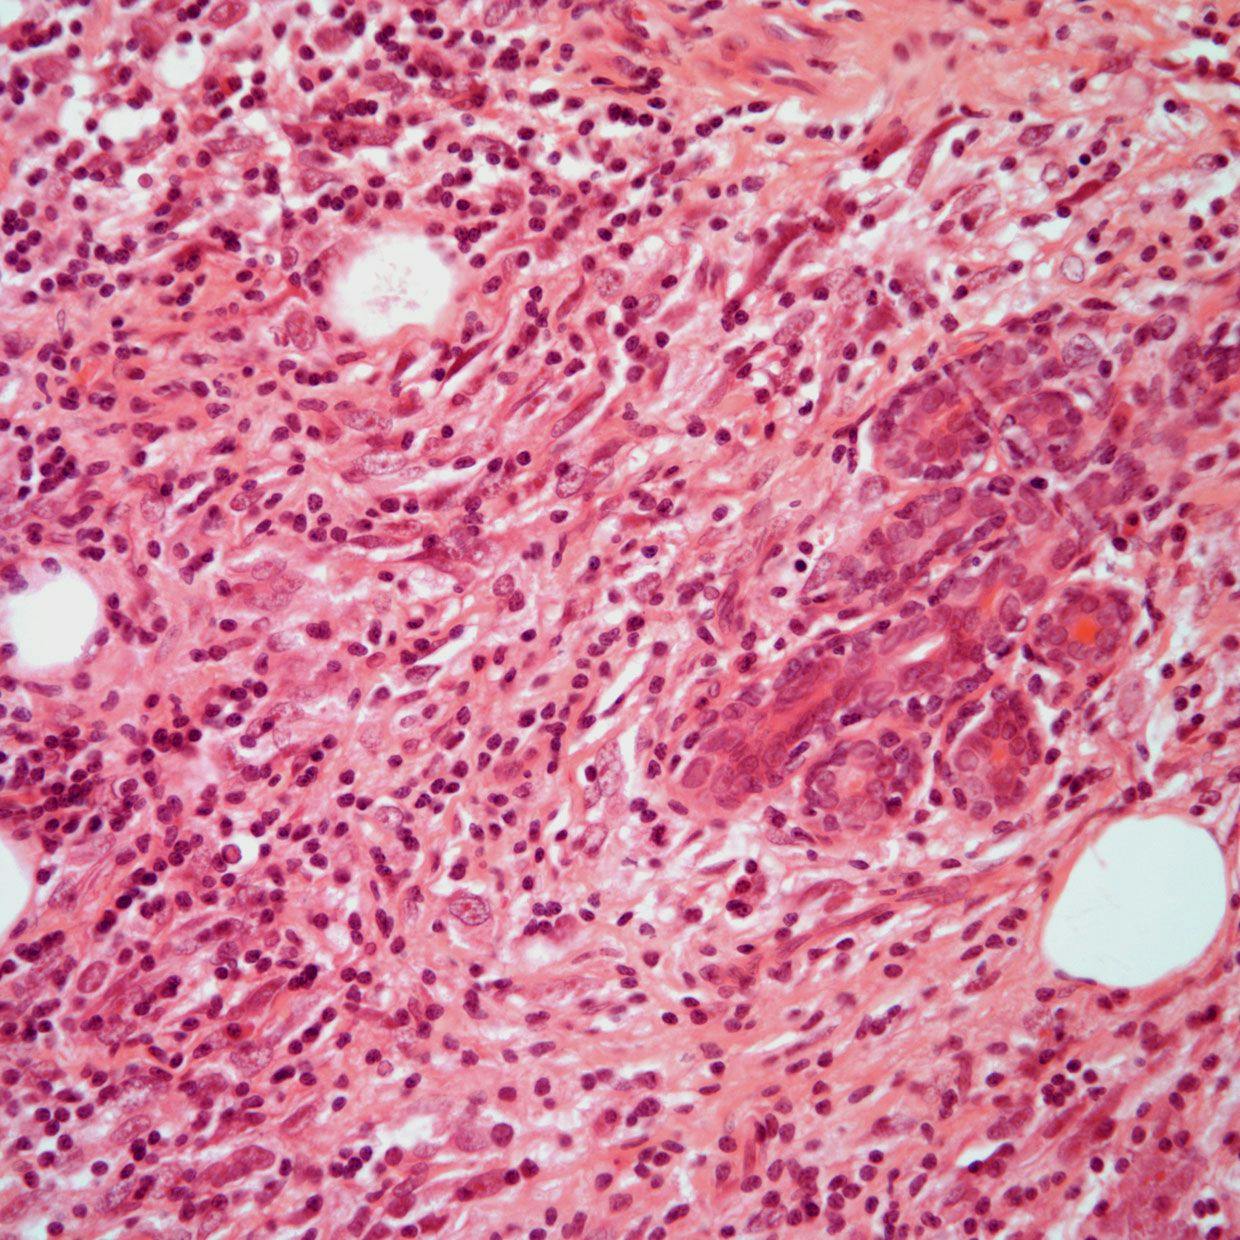 Small Nodule Found in Breast of 37-Year-Old Patient